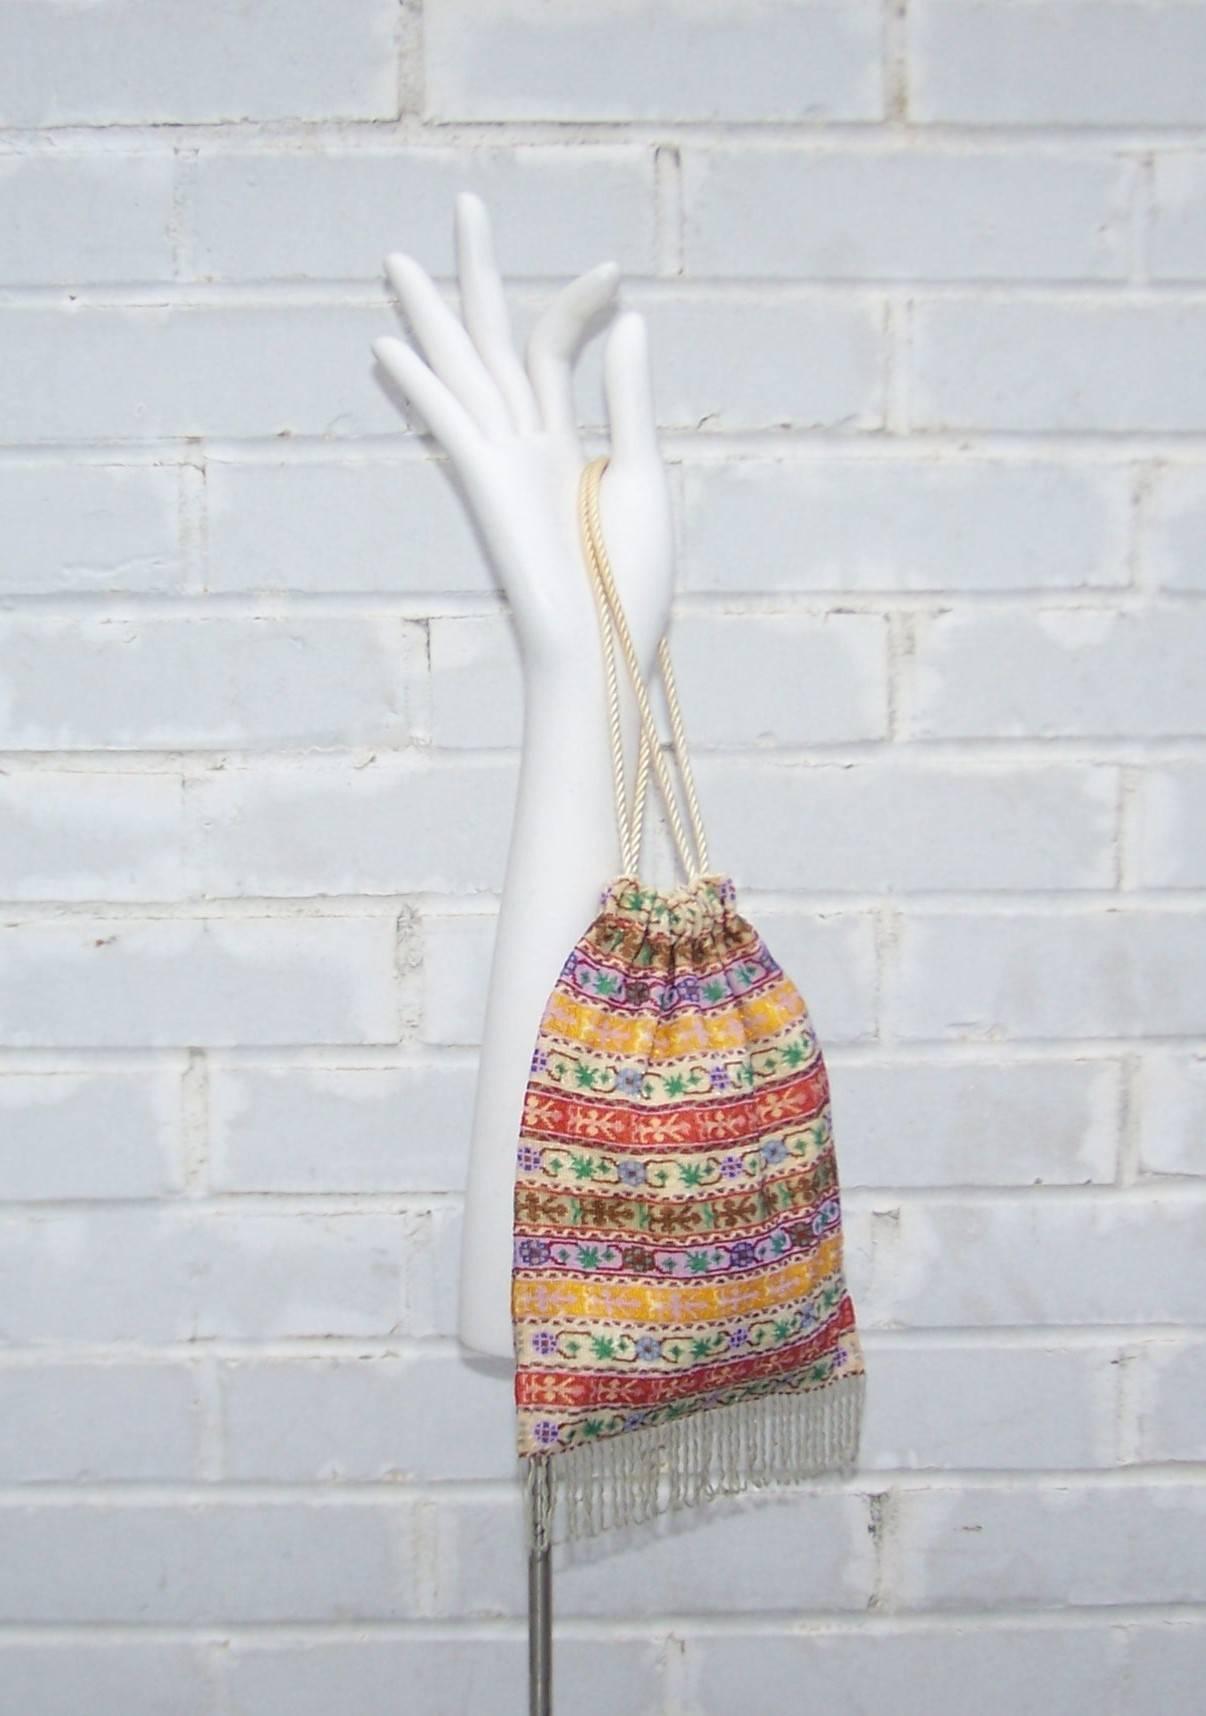 This handbag is reminiscent of the micro beaded drawstring handbags of the early 1900's but with a vibrant 1960's visual twist.  The intricate striped floral design is colorfully beaded with glass beads so tiny that they are best appreciated with a